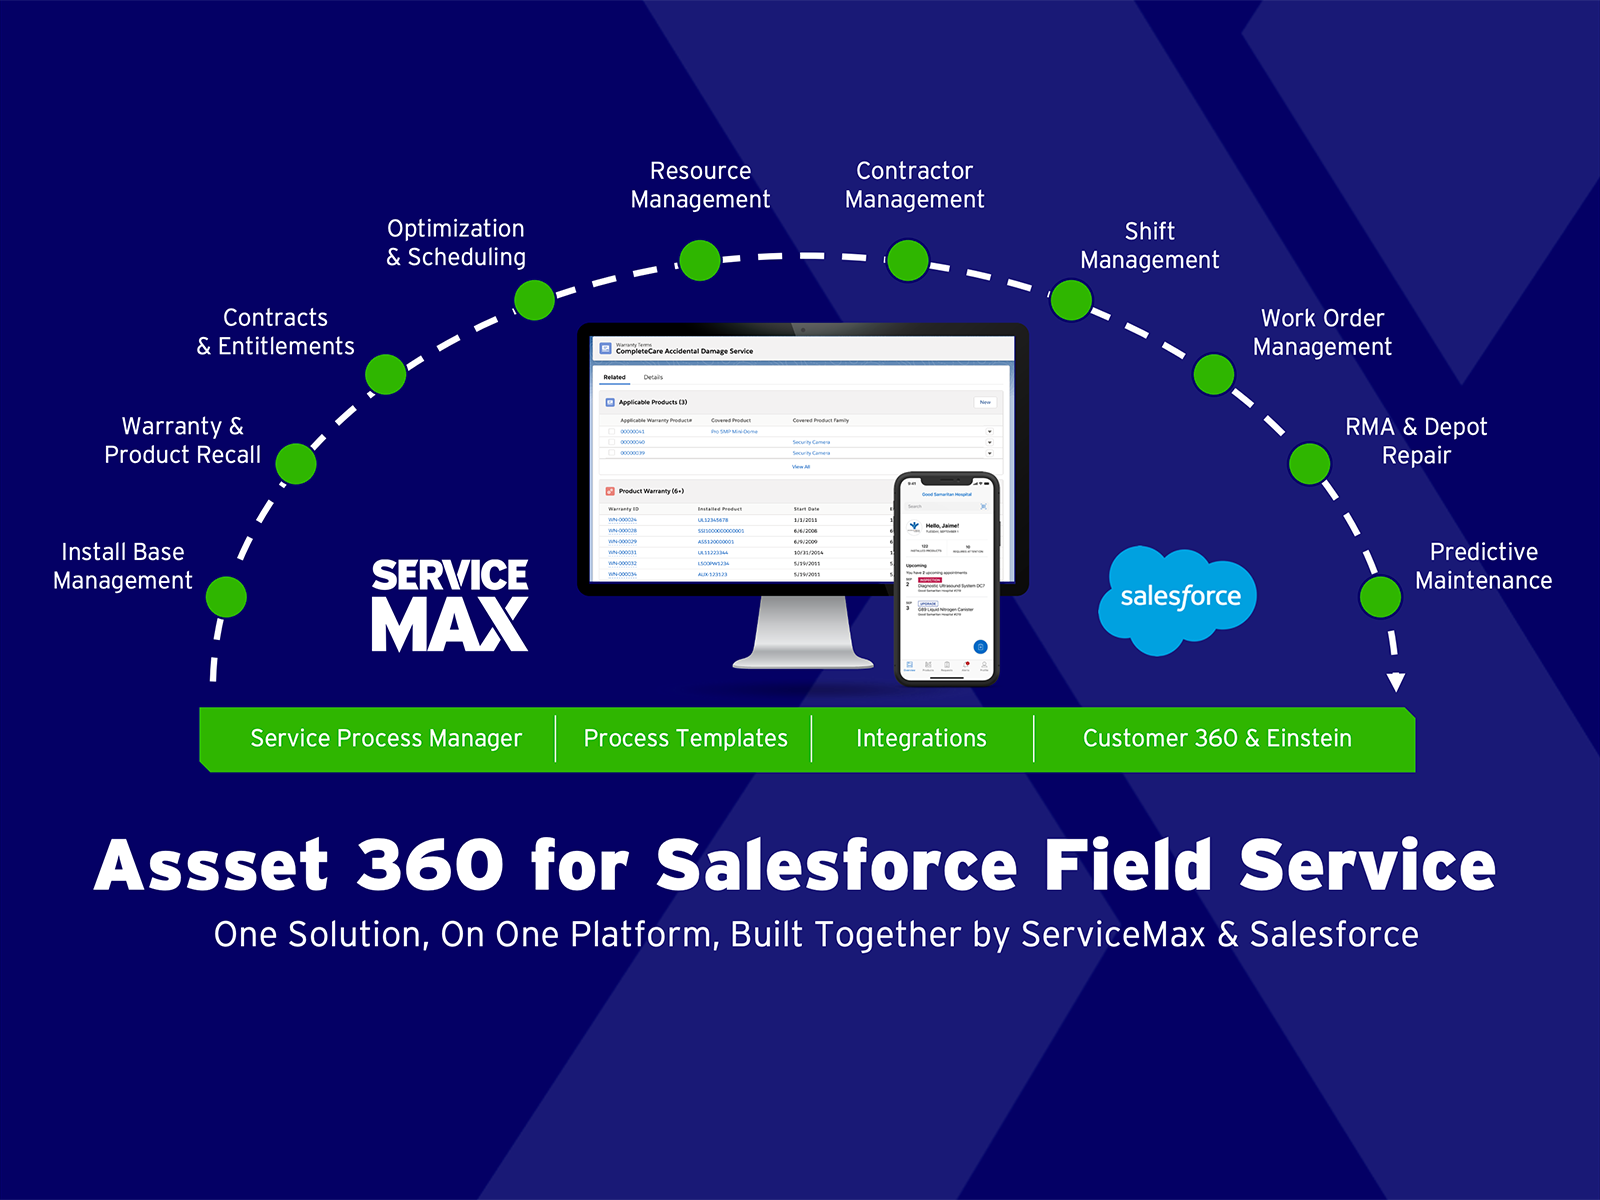 ServiceMax Software - ServiceMax and Salesforce have joined forces to deliver an unparalleled solution that drives operational efficiency with a 360-degree view of assets on the world’s #1 CRM platform.